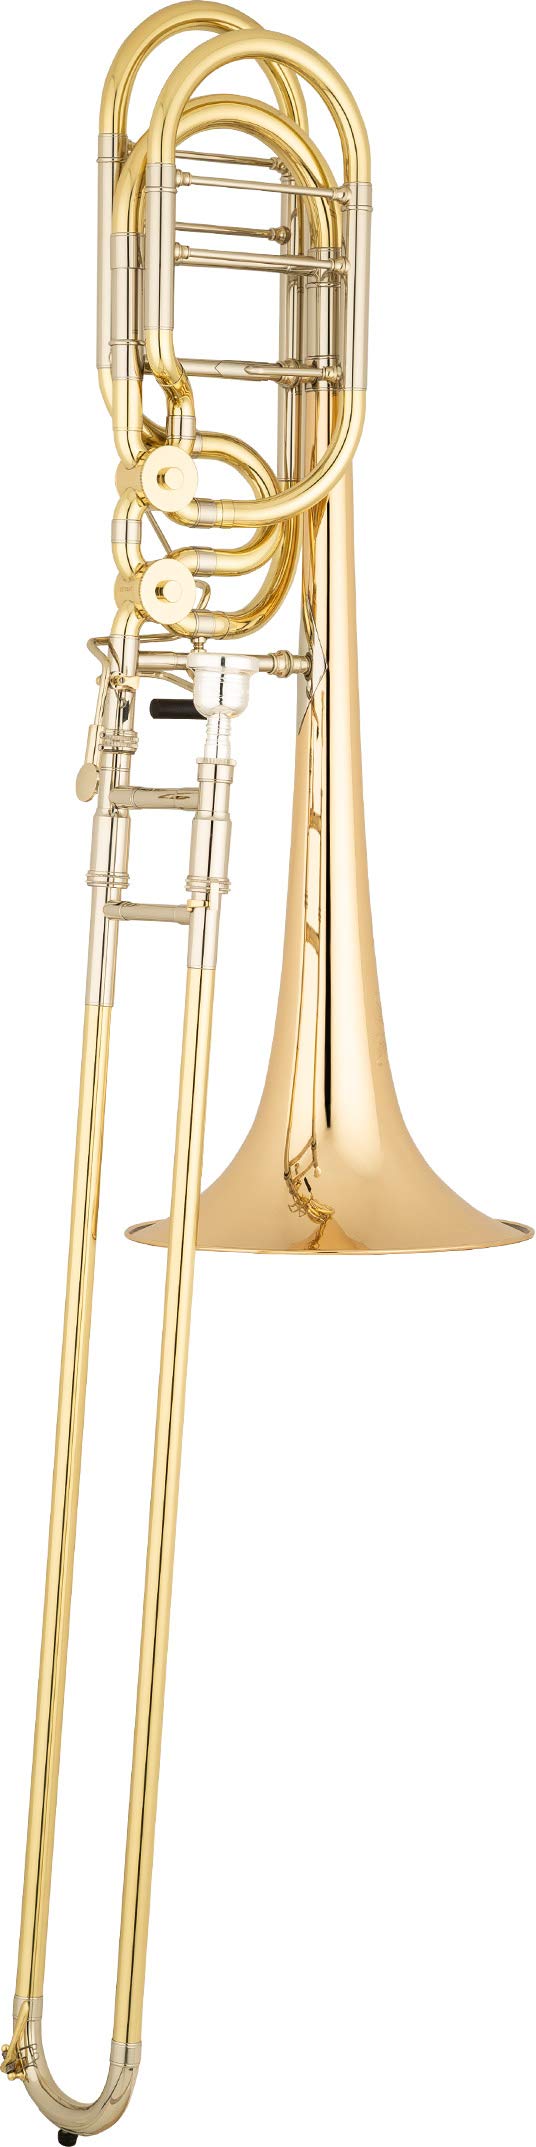 Andreas Eastman Bb/F/Gb Bass trombone outfit with Gold Brass Bell..0.562" bore, 3 leadpipes